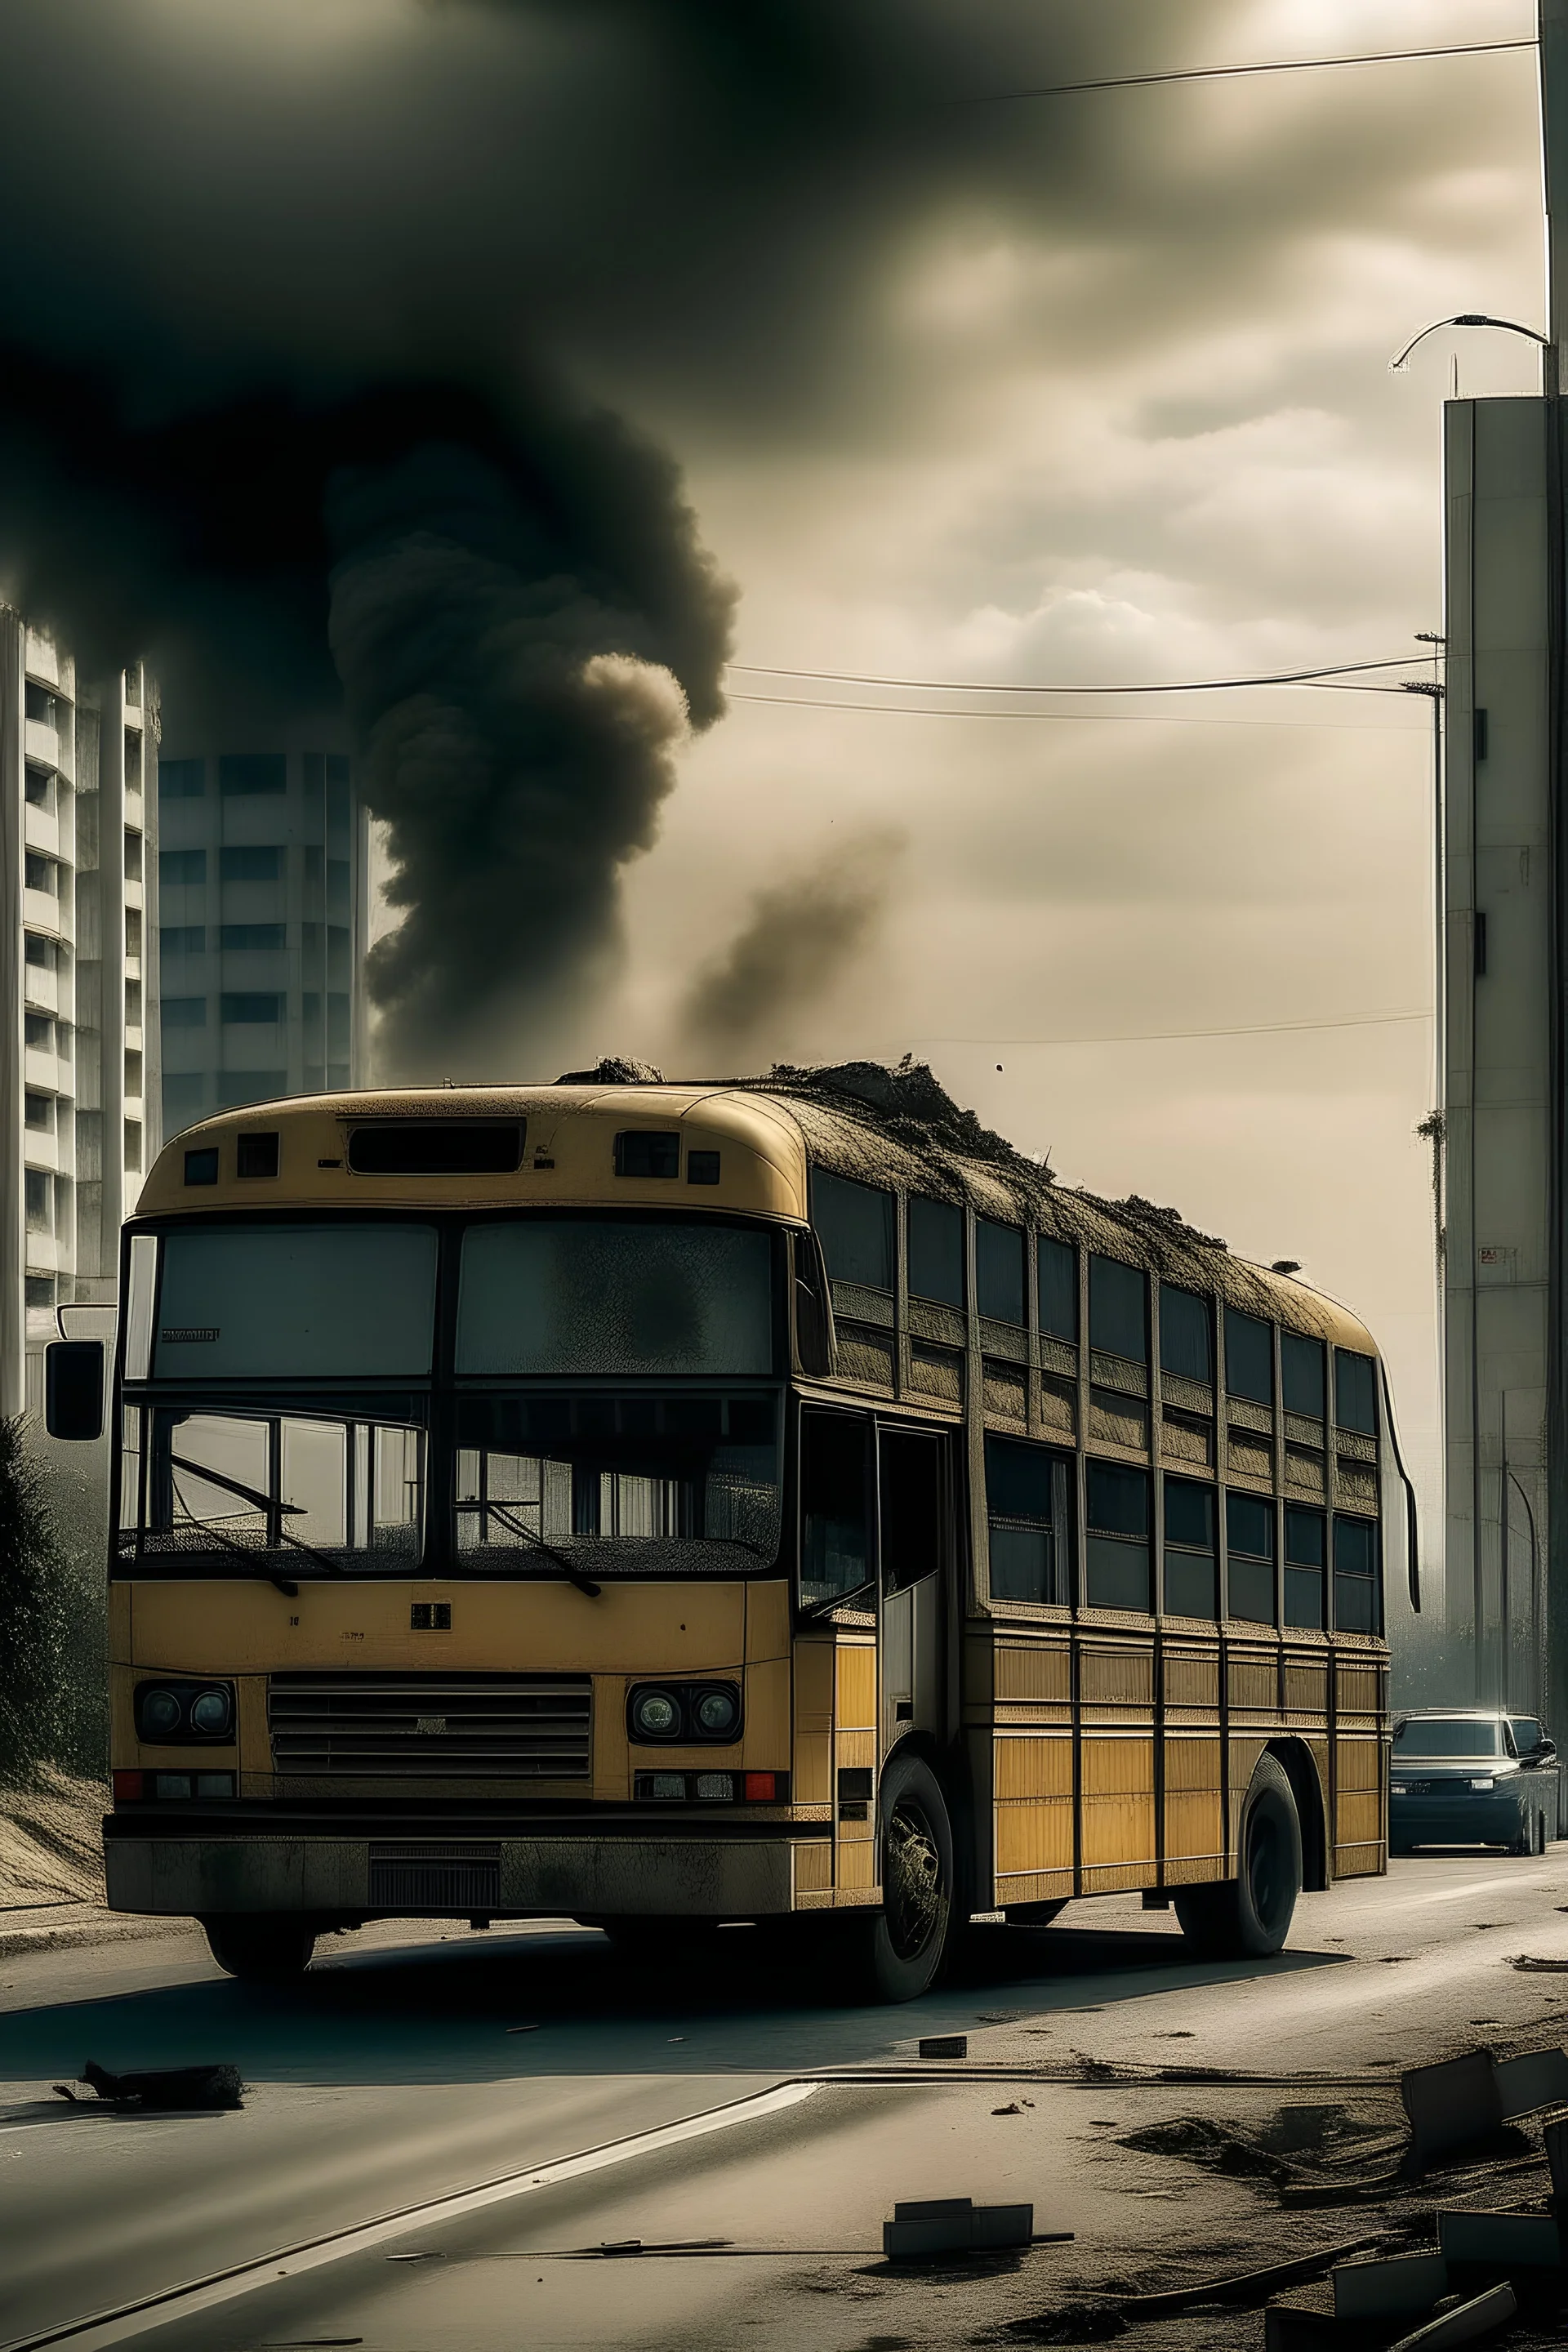 A bus driving from a bombing city